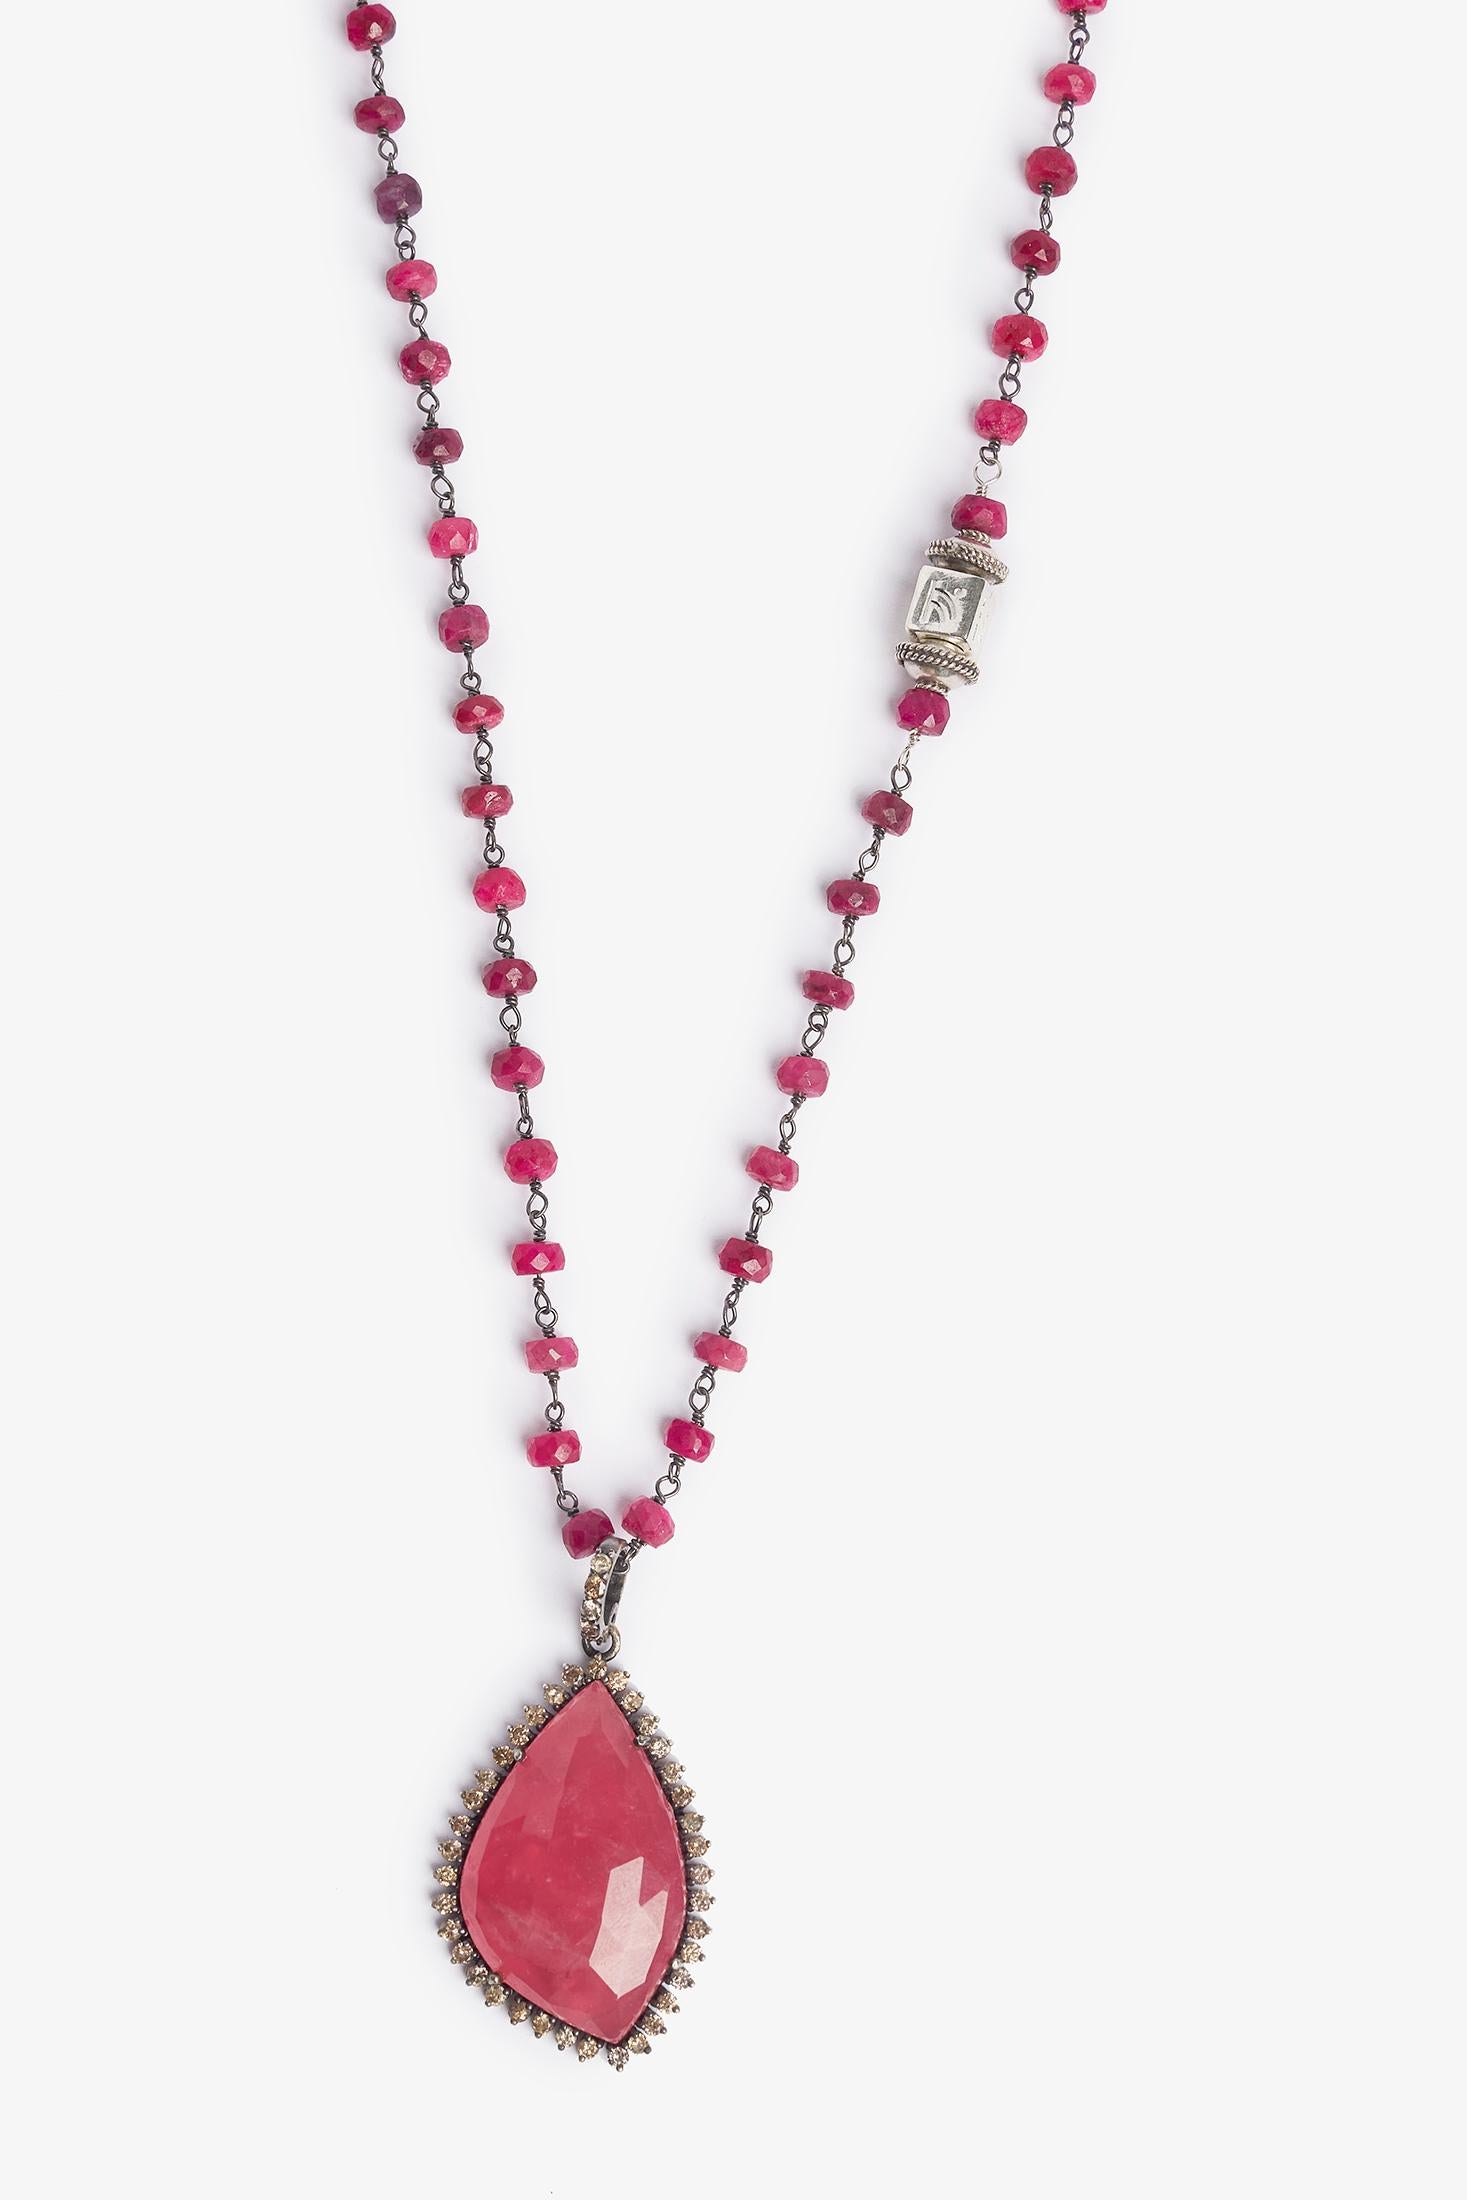 Bead Red Ruby Asmara Necklace For Sale